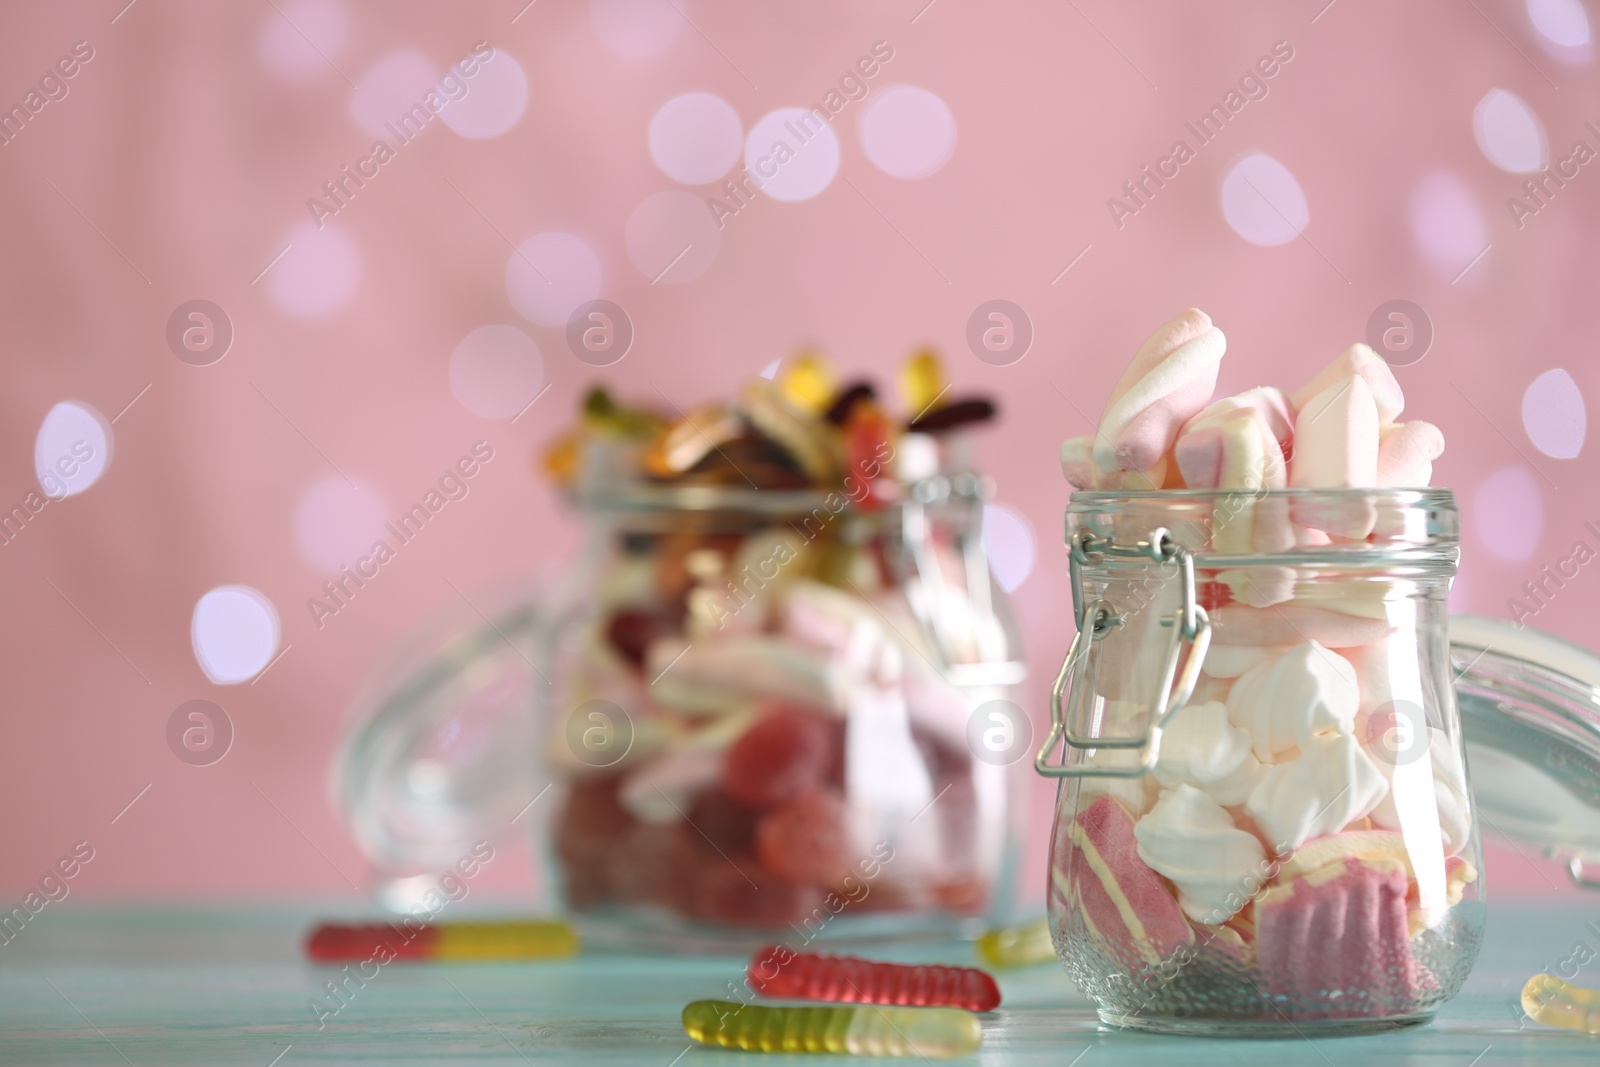 Photo of Delicious marshmallows in jar on table against blurred background, closeup. Space for text